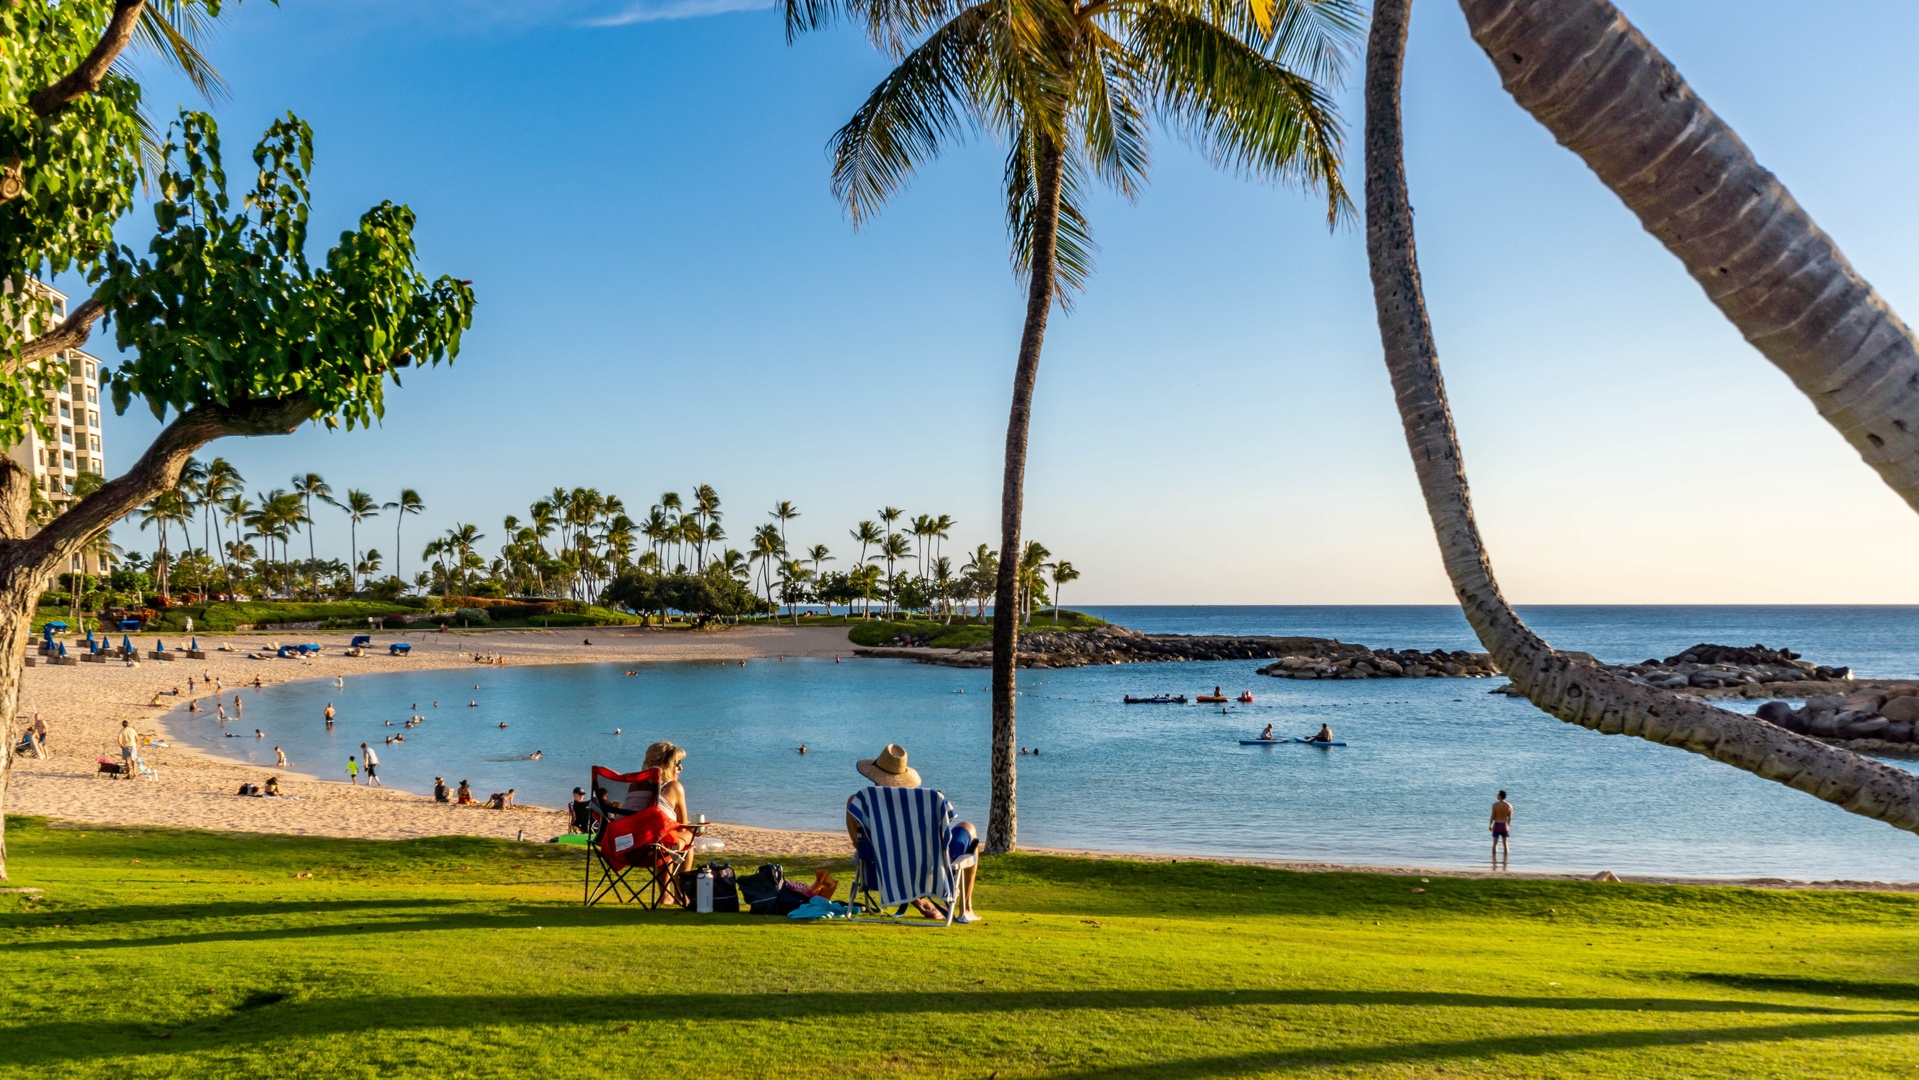 Kapolei Vacation Rentals, Coconut Plantation 1234-2 - The best days are island days under swaying palm trees at the lagoon.